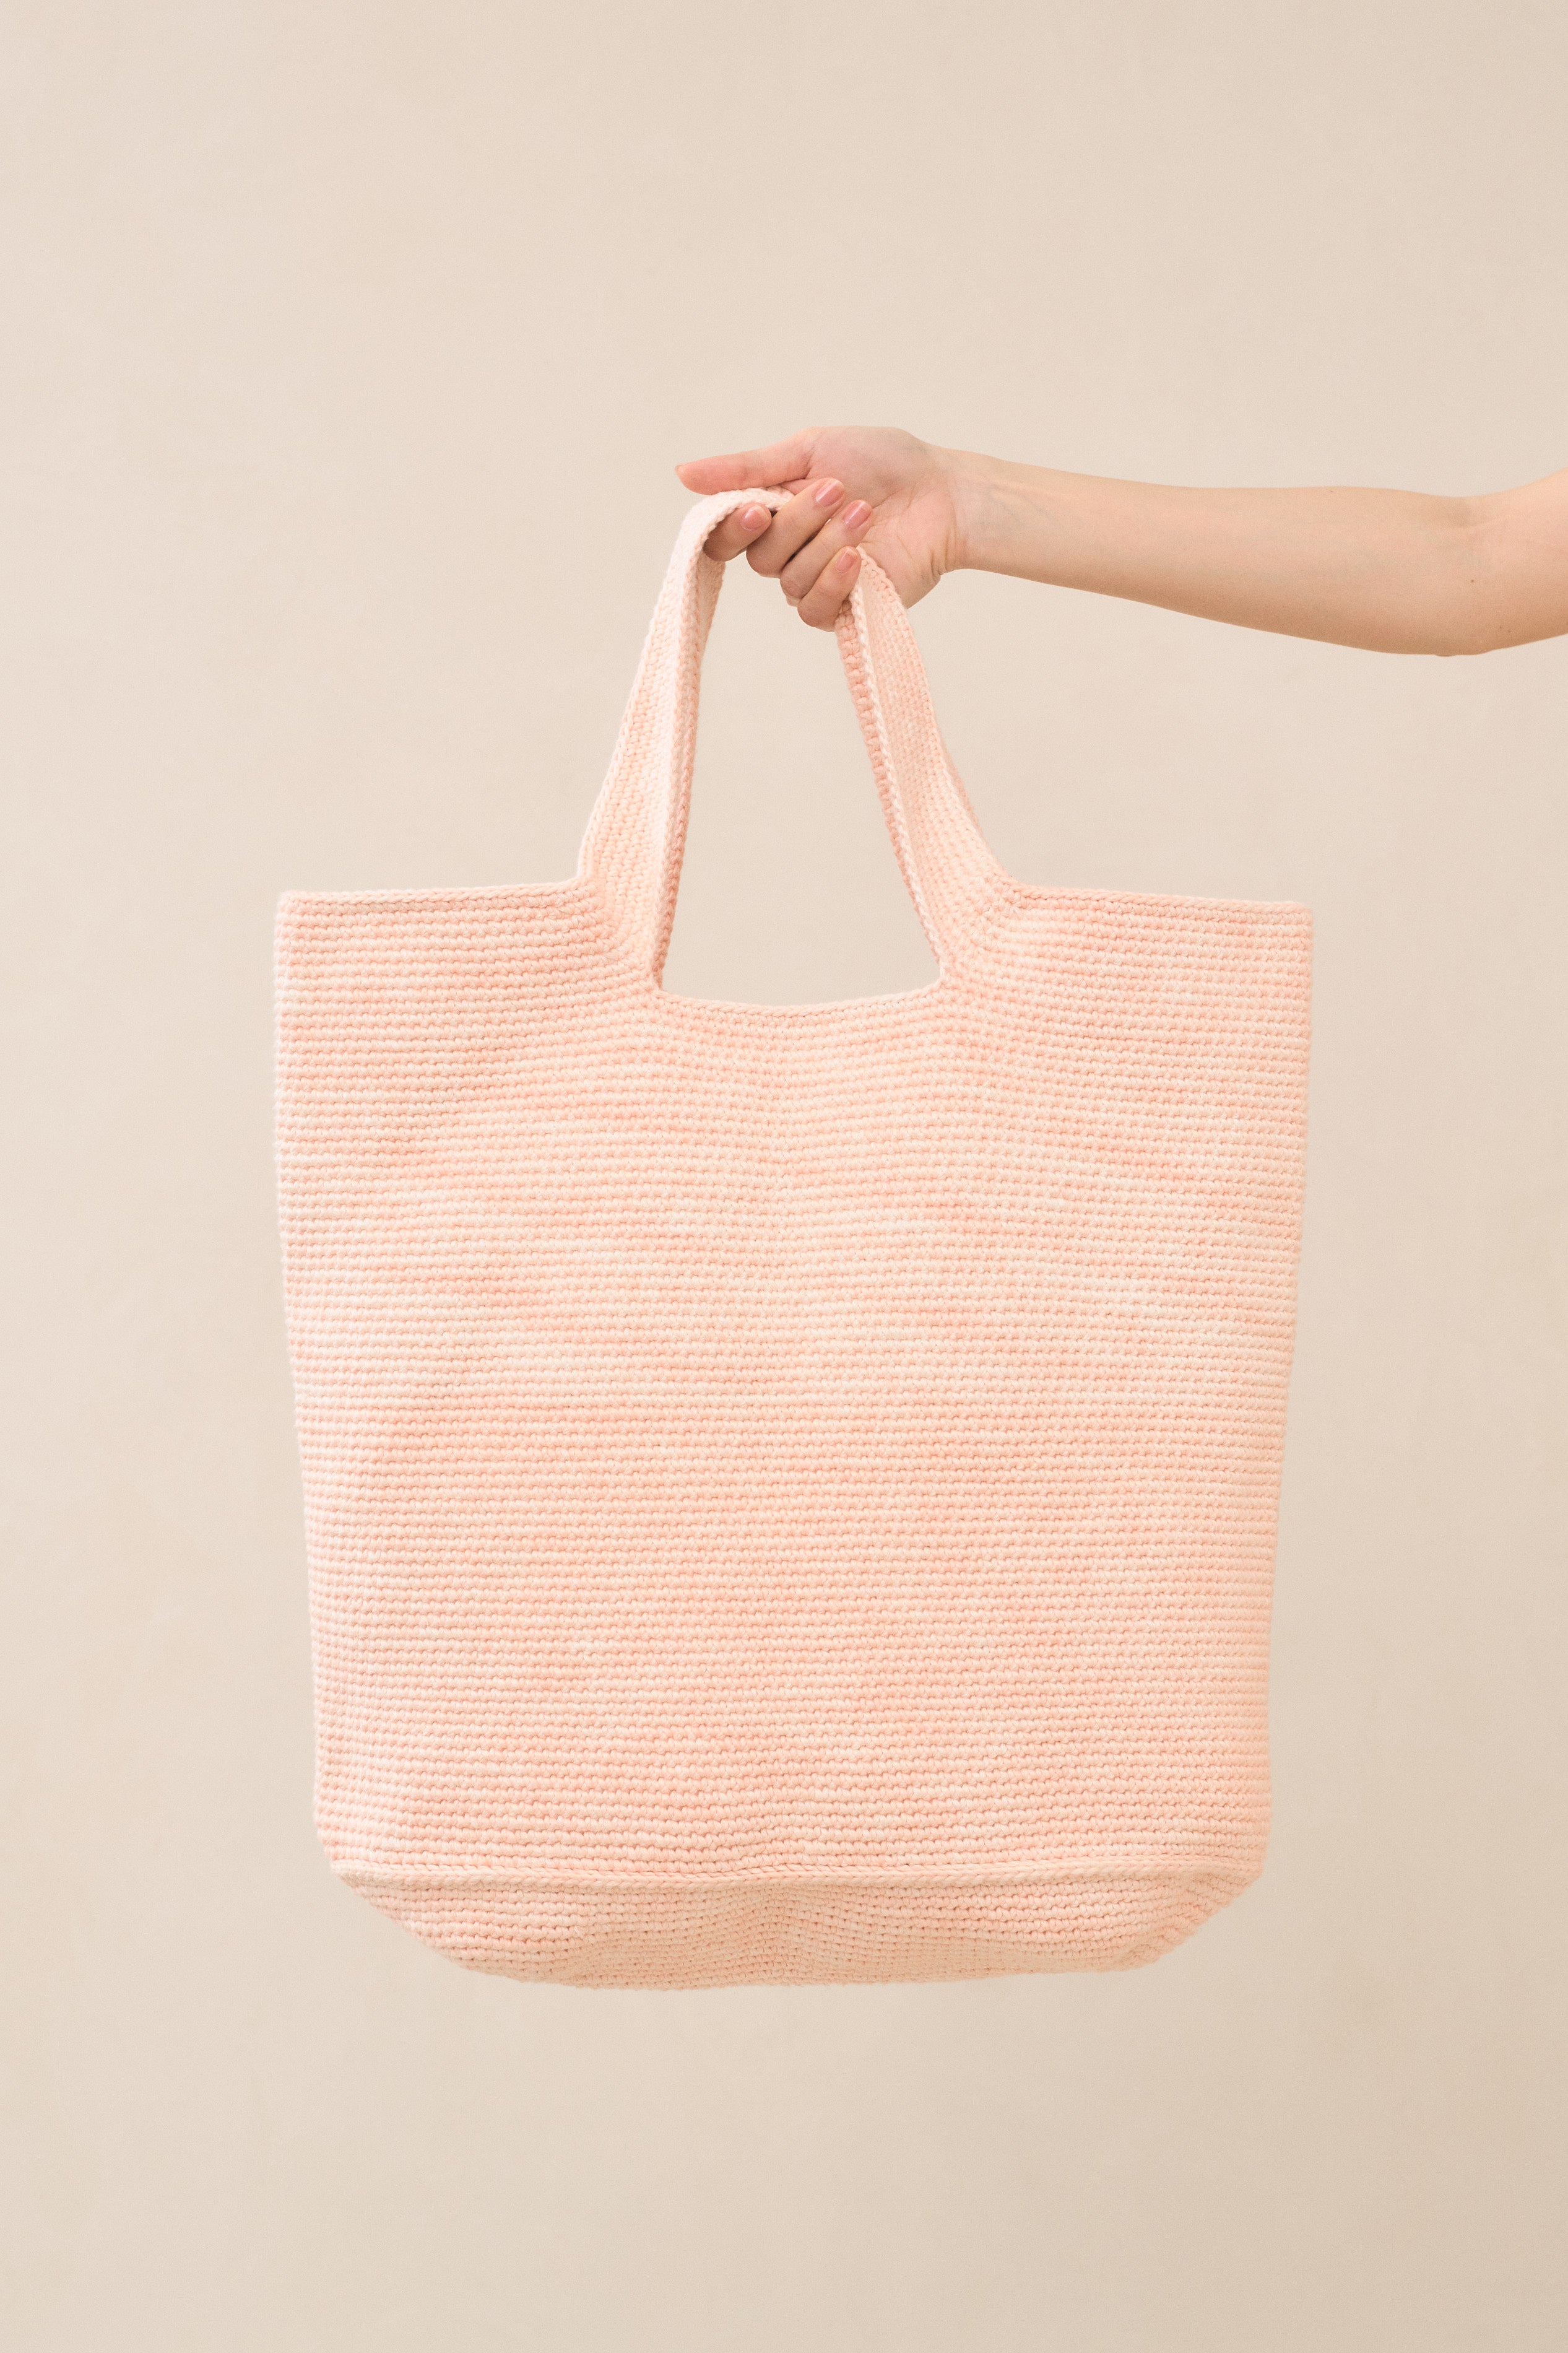 OVAL TOTE